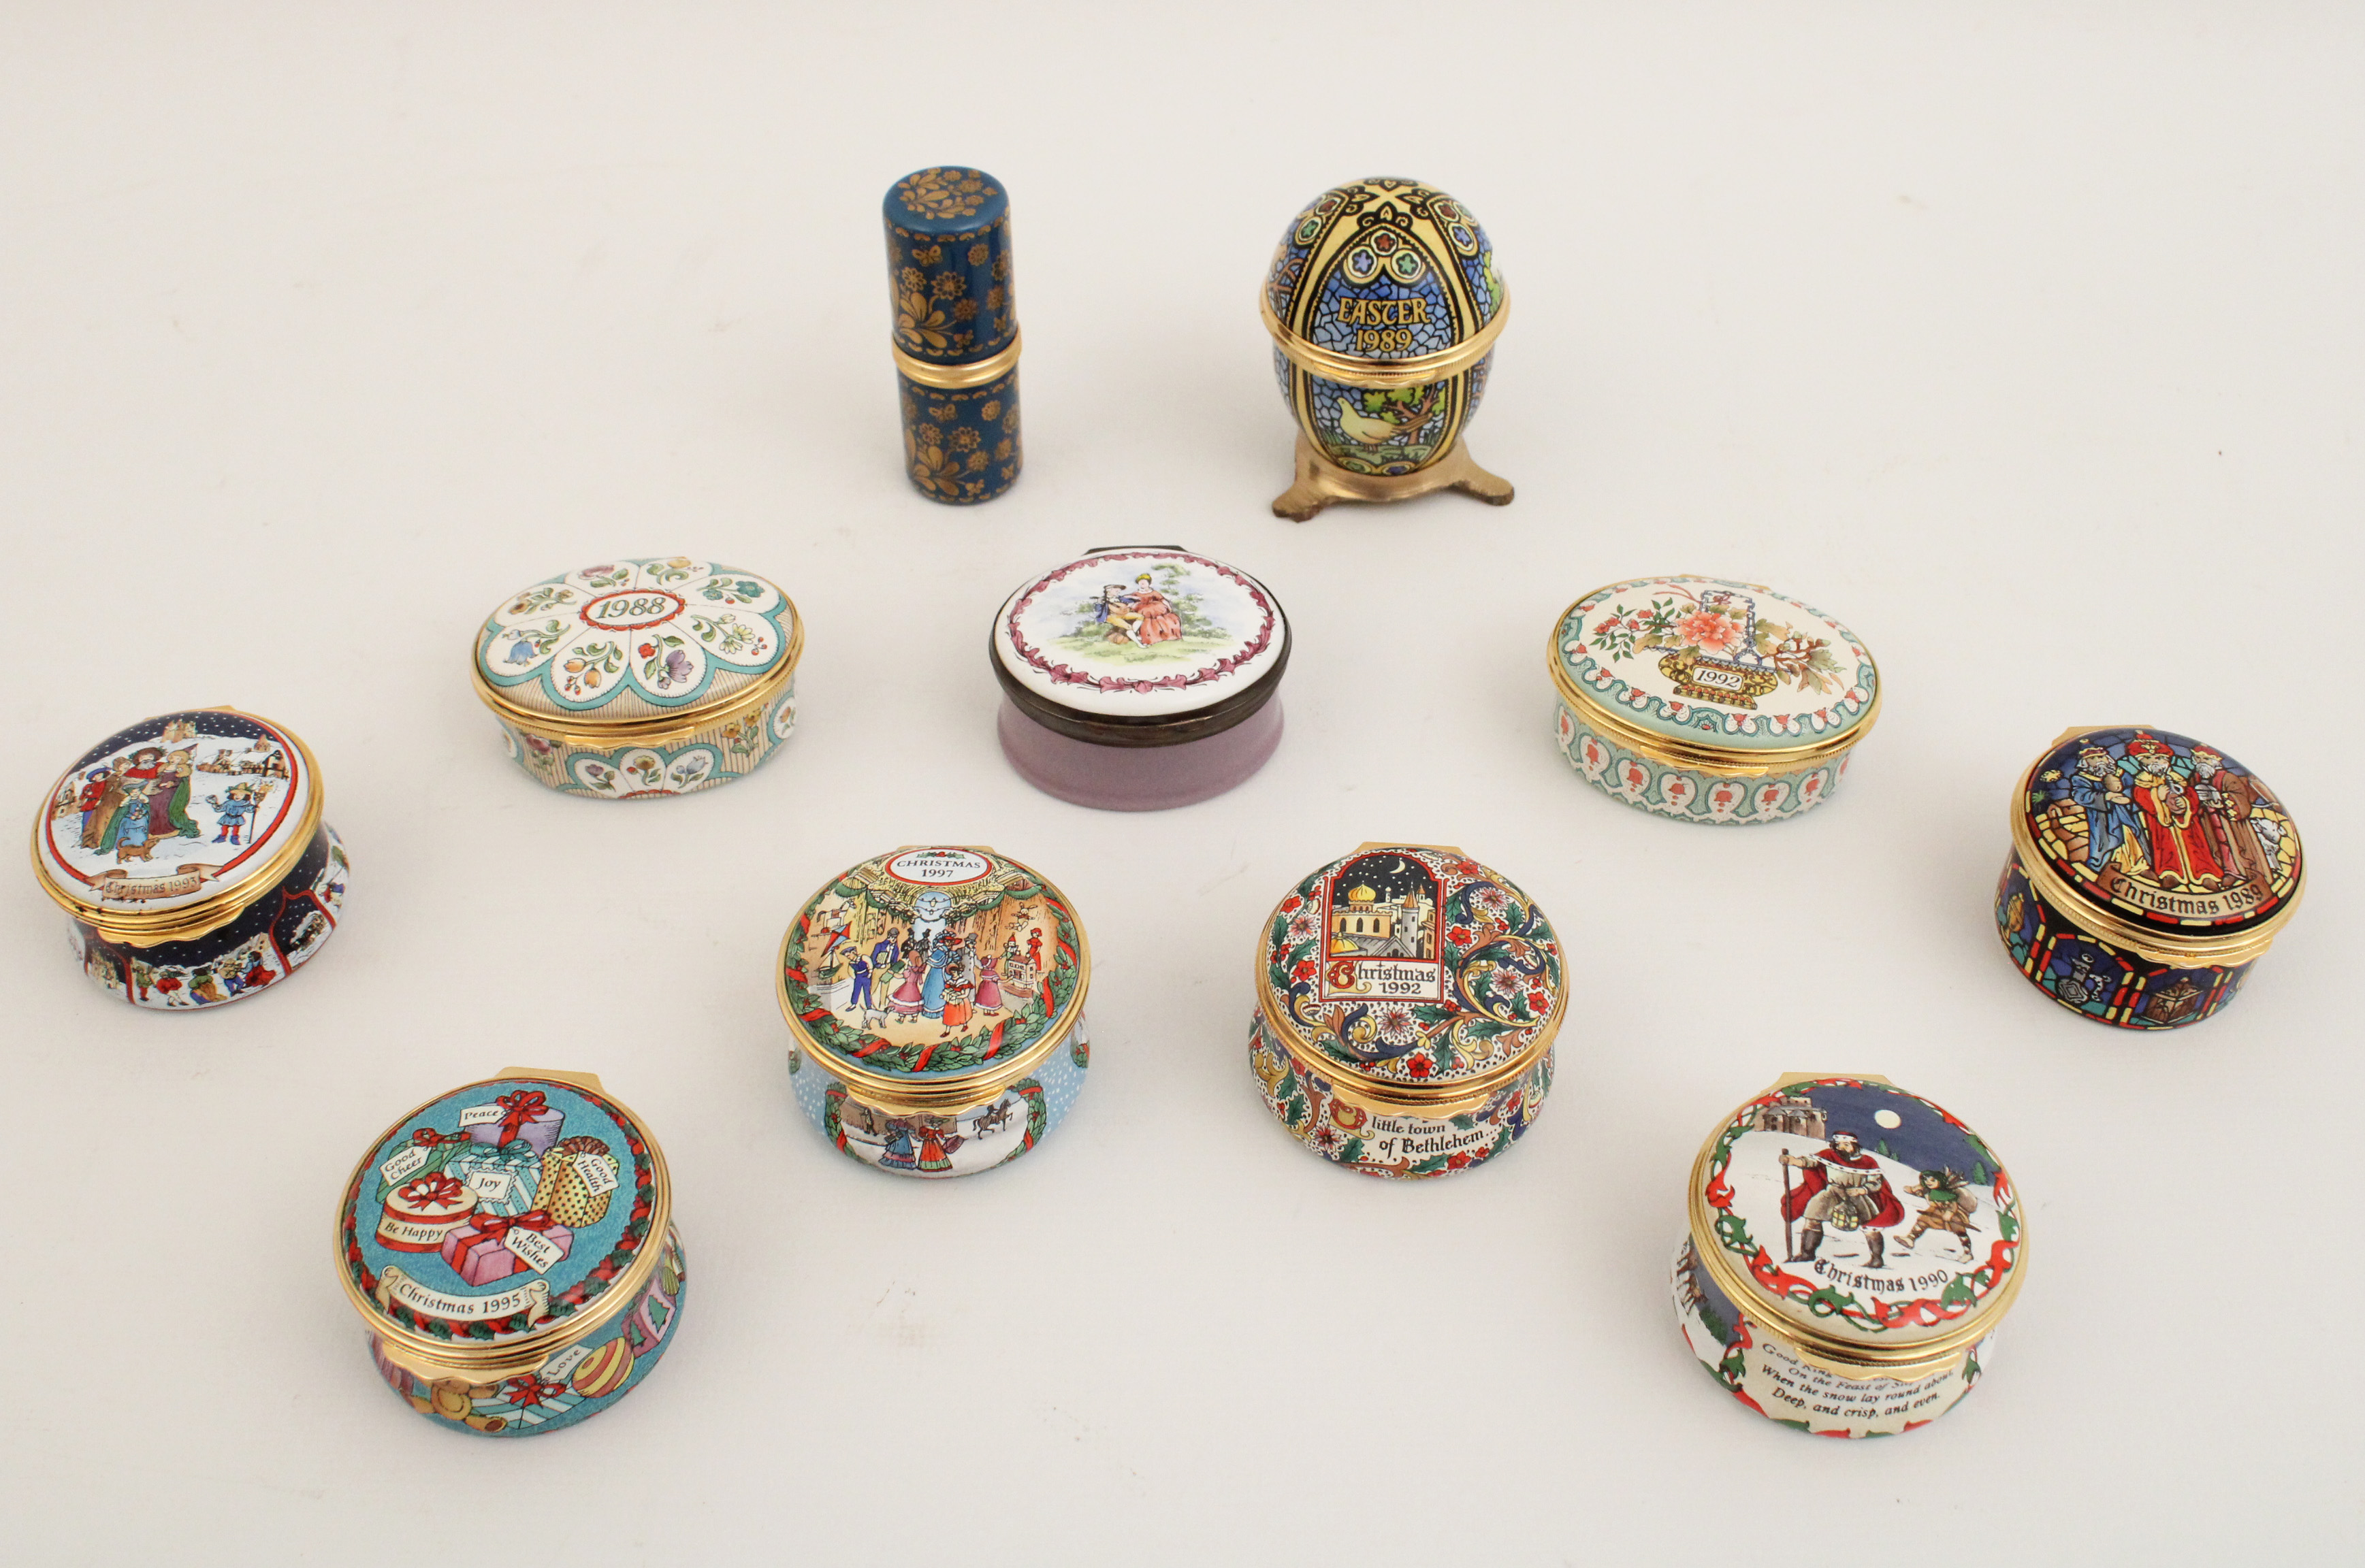 COLLECTION OF 11 ENGLISH ENAMEL